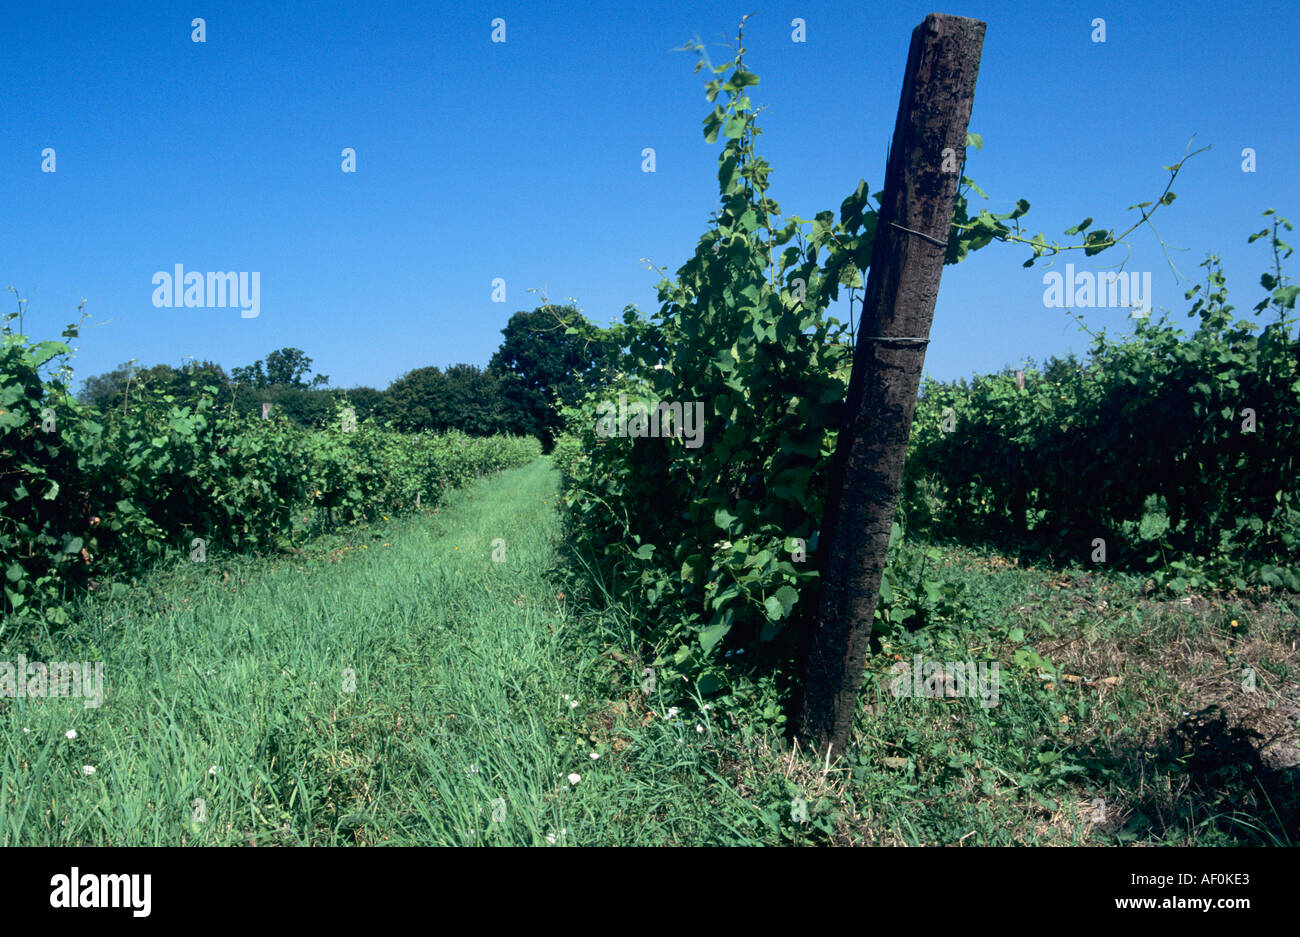 Vines at an Suffolk vineyard used for English wine making Stock Photo